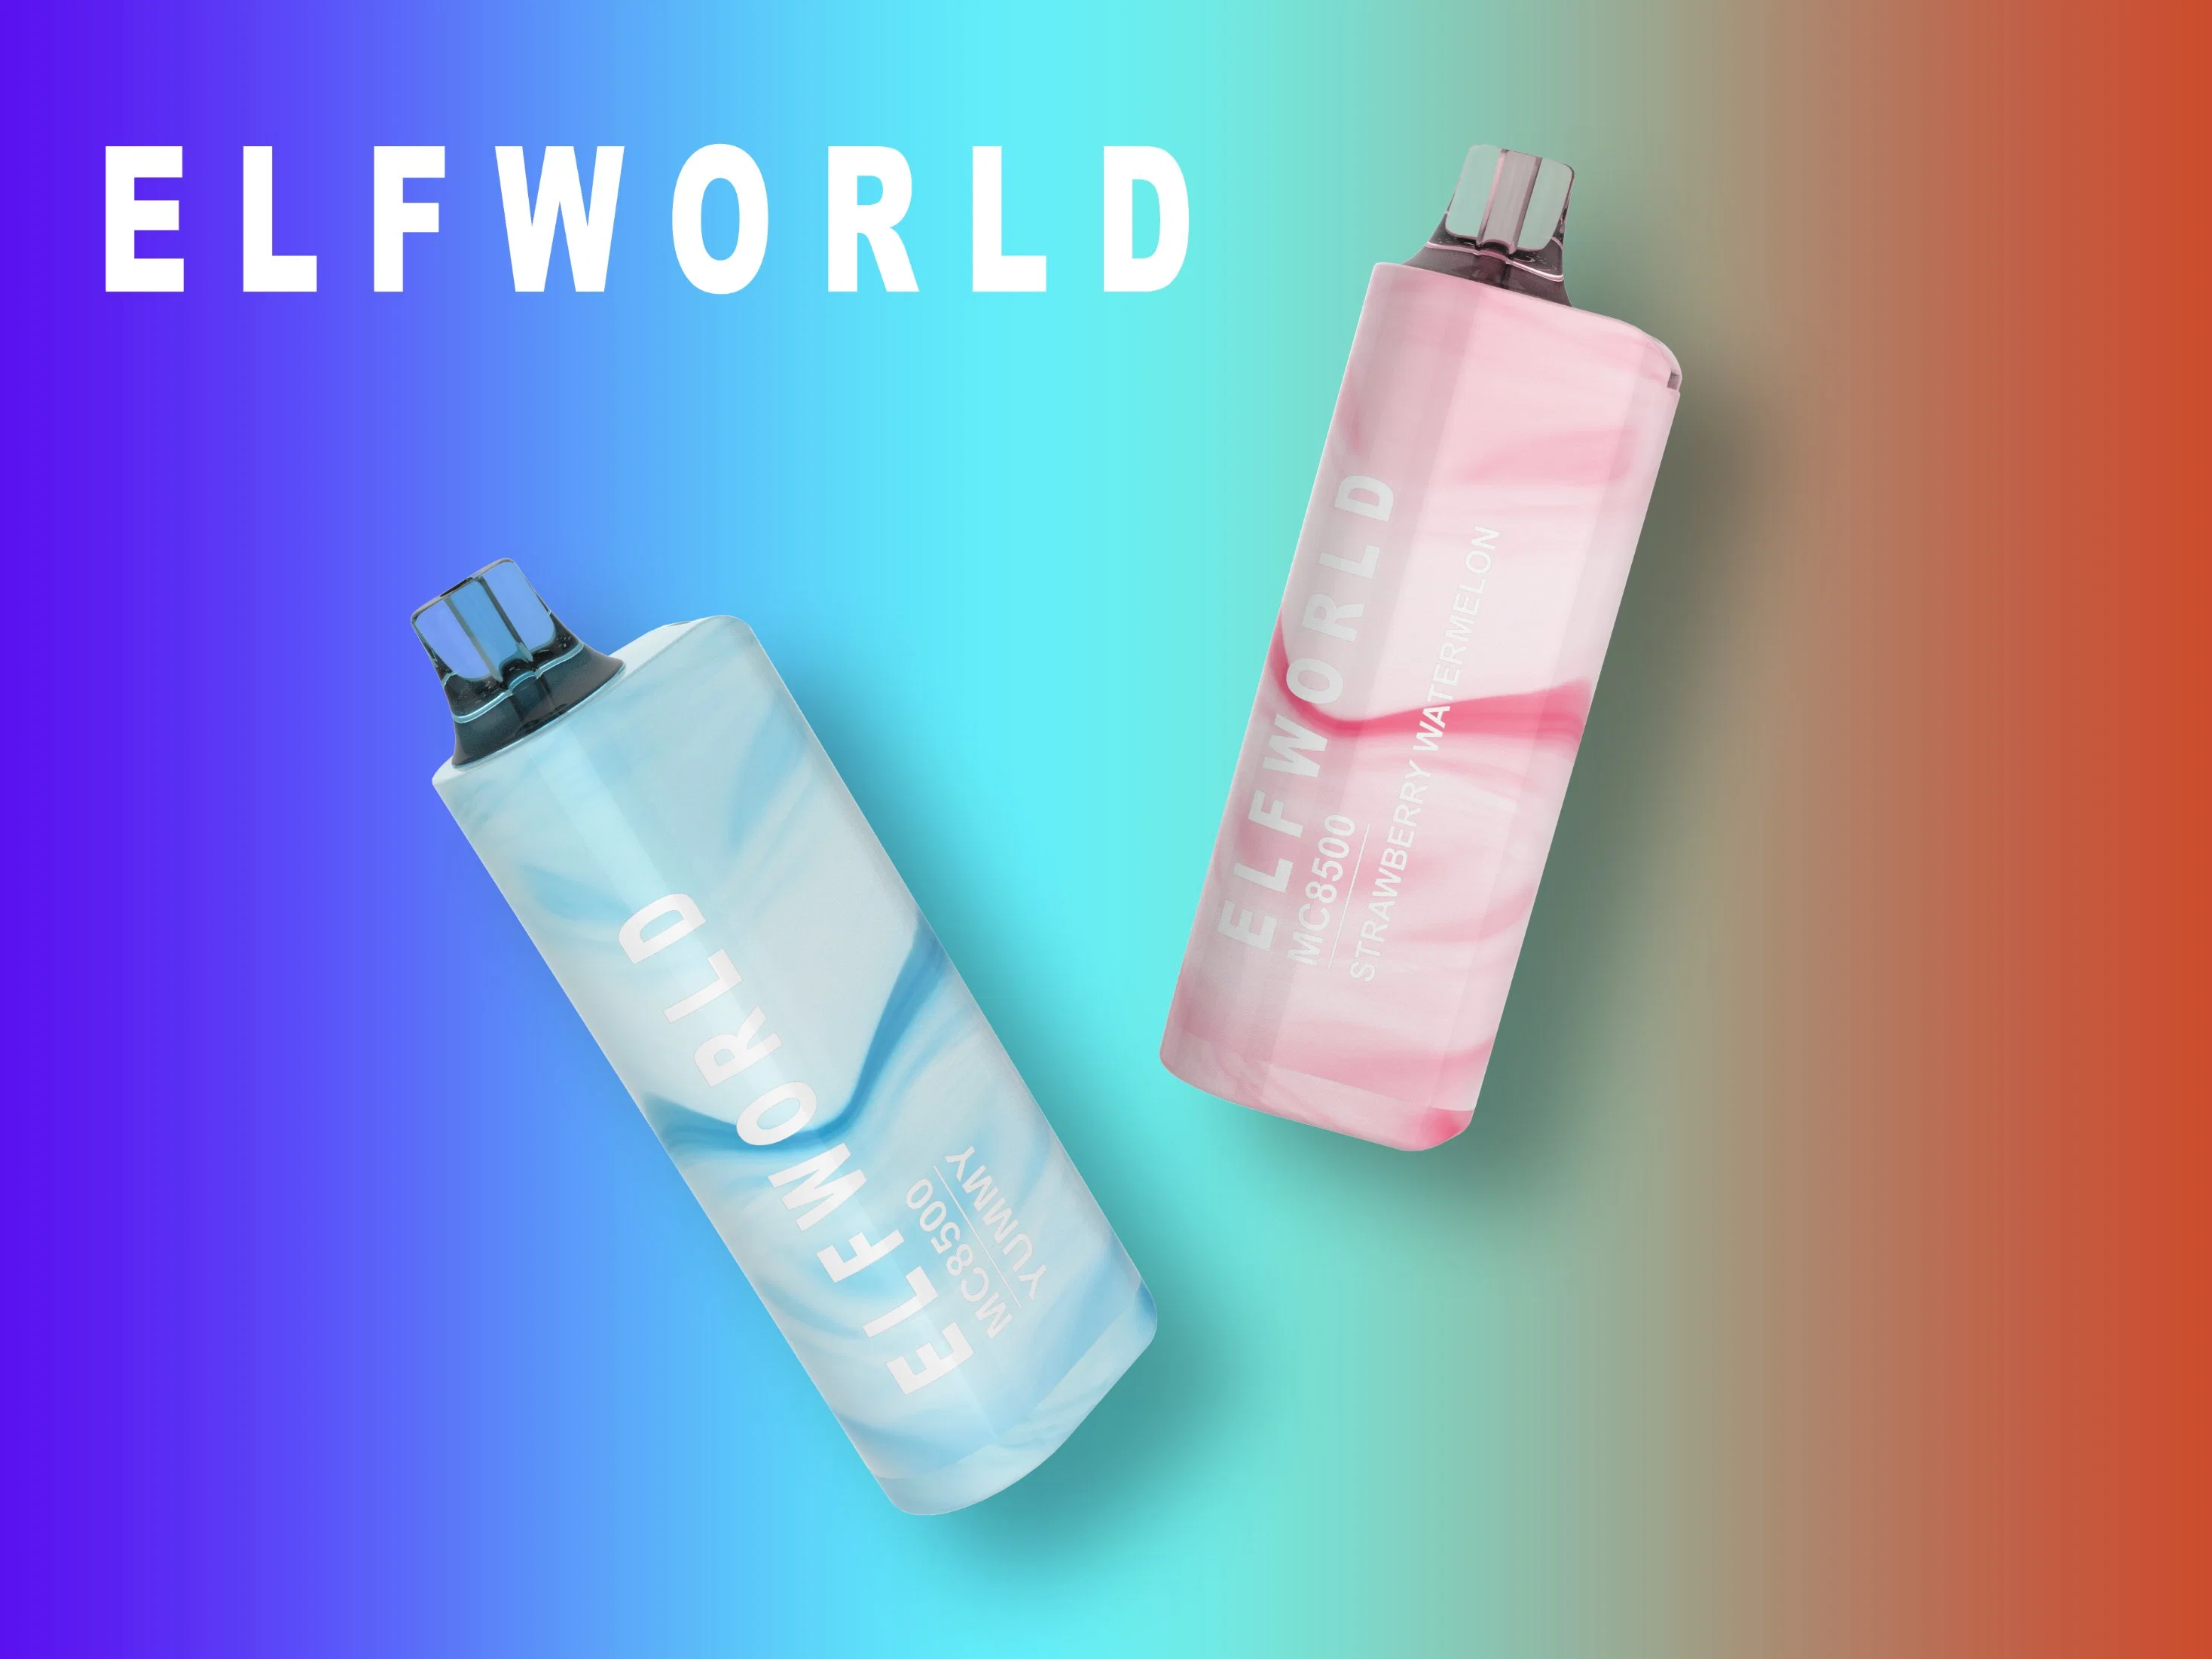 Factory Supply Disposable/Chargeable Elf World 5000 6000puff Bar Vape Wholesale/Supplier I Nicotine RM Ecigarette Crystal Elfworld Lost Orion Vaporizer Vape Bar 8500 Lost 7500 Puff